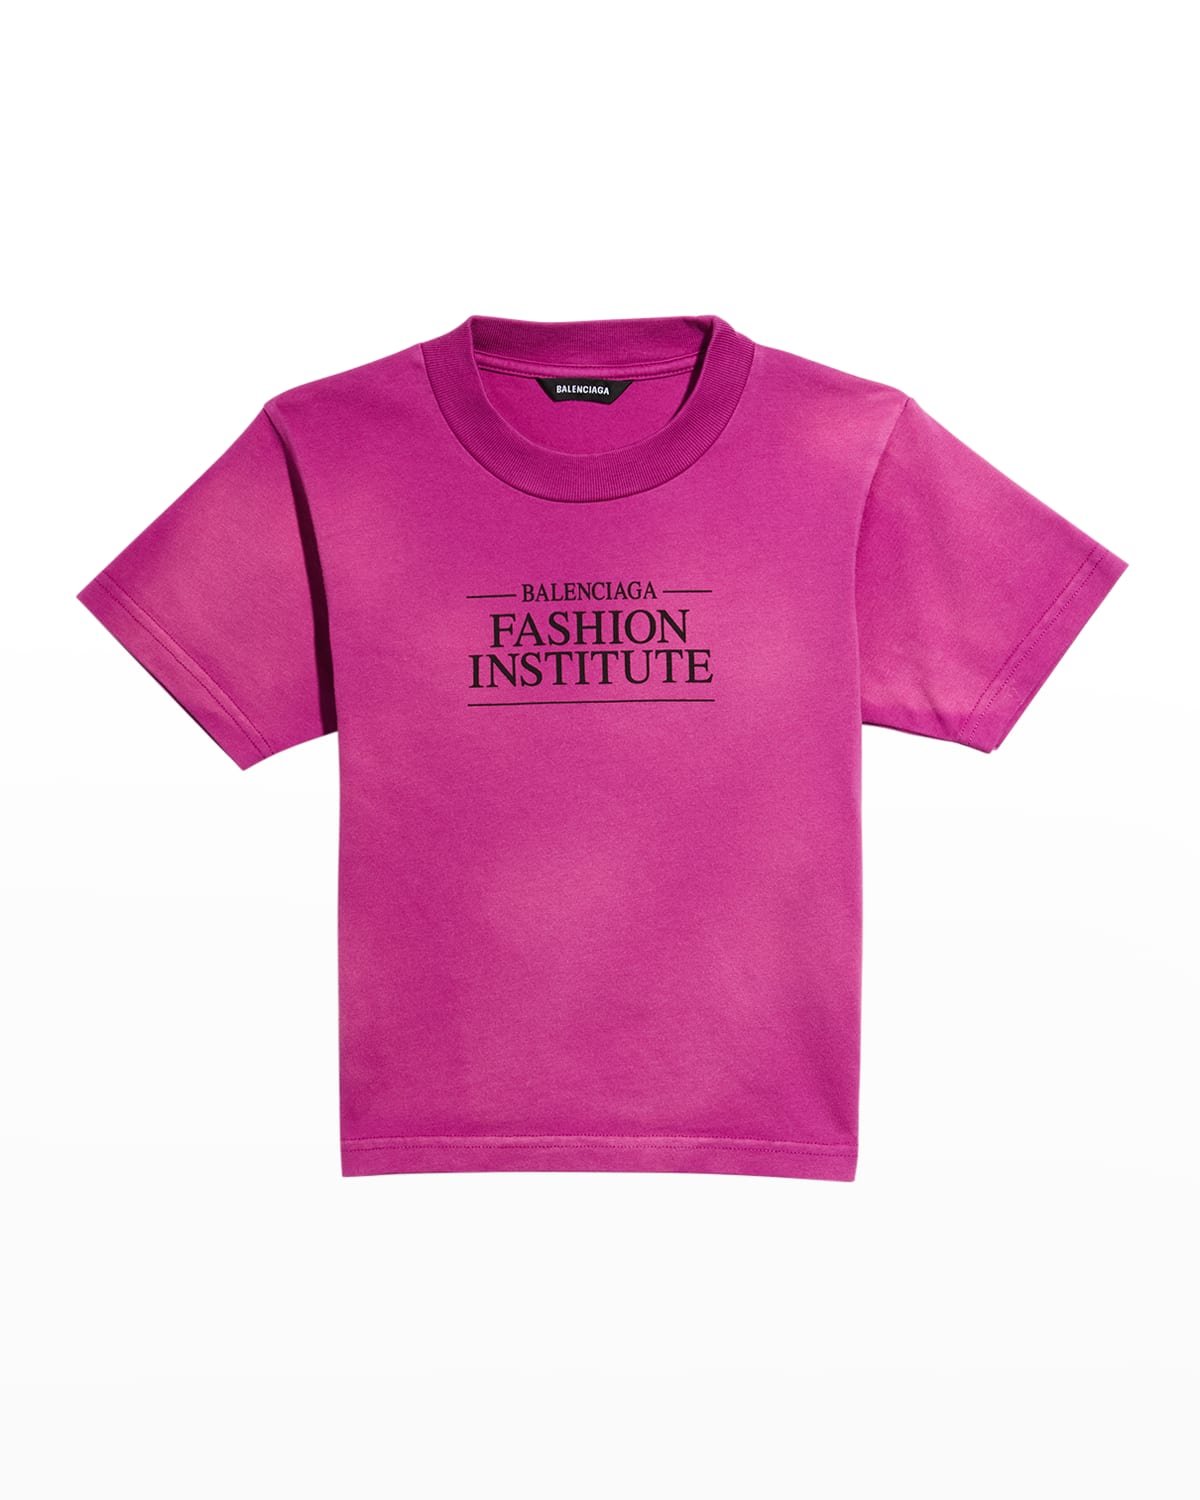 Girl's Fashion Institute T-Shirt, Size 2-10